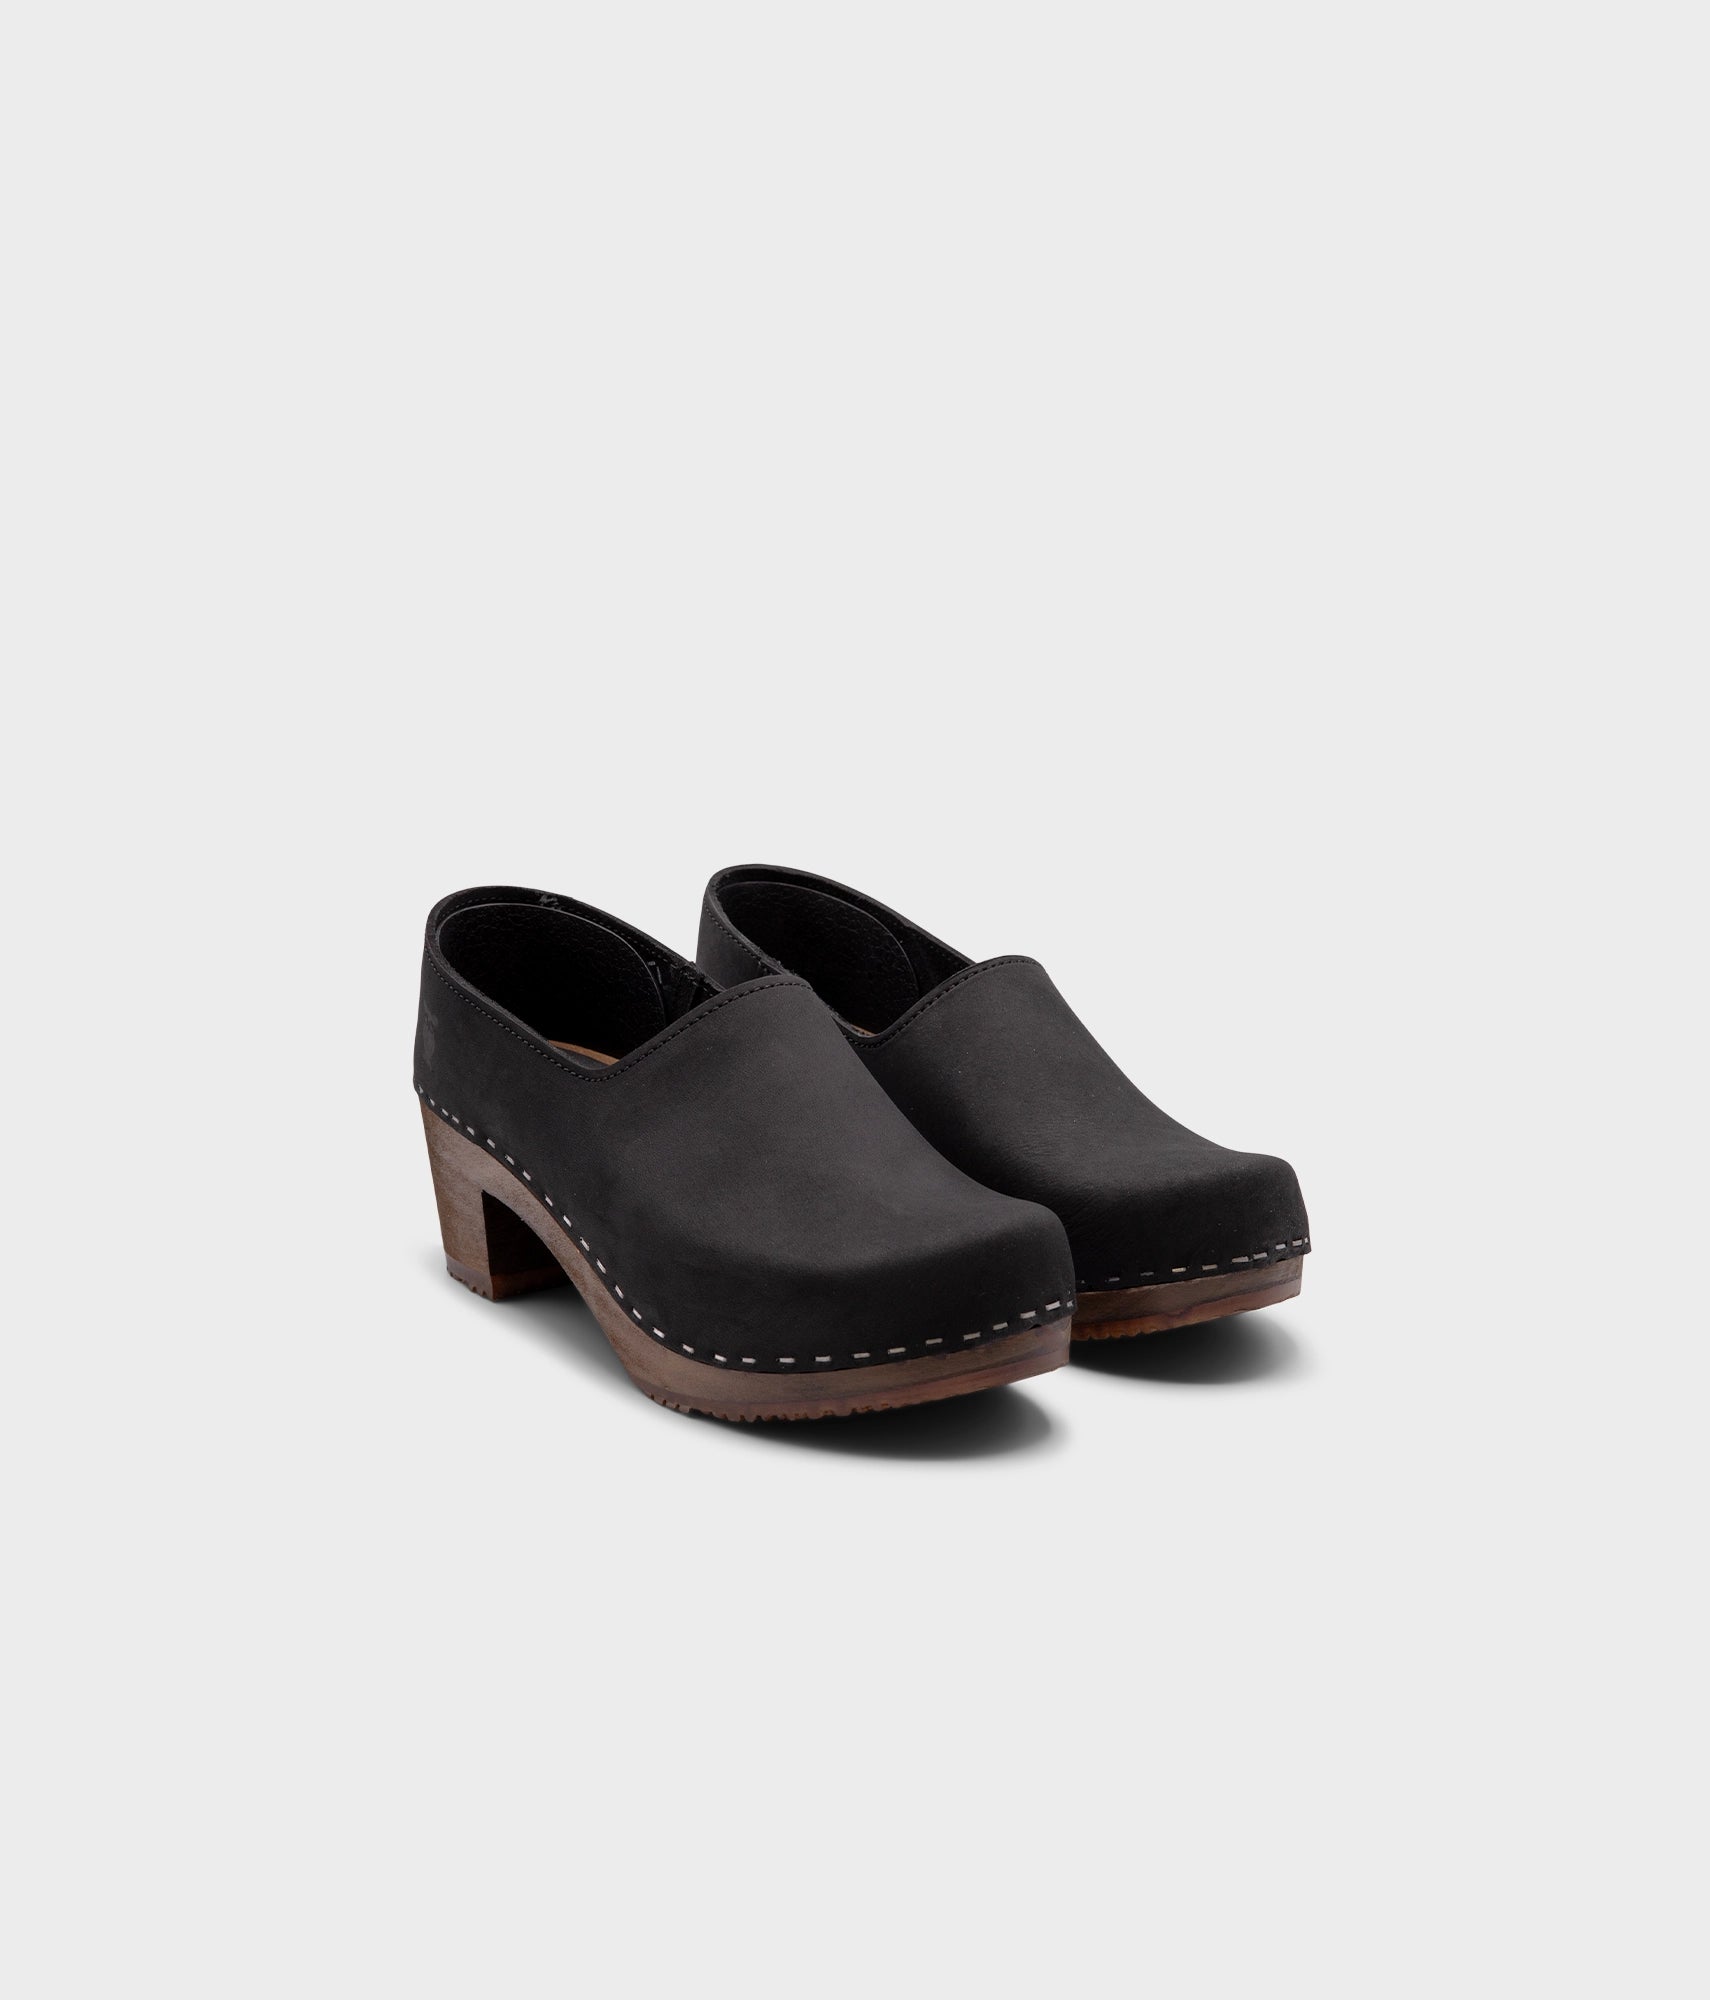 high heeled closed-back clogs in black nubuck leather stapled on a dark wooden base